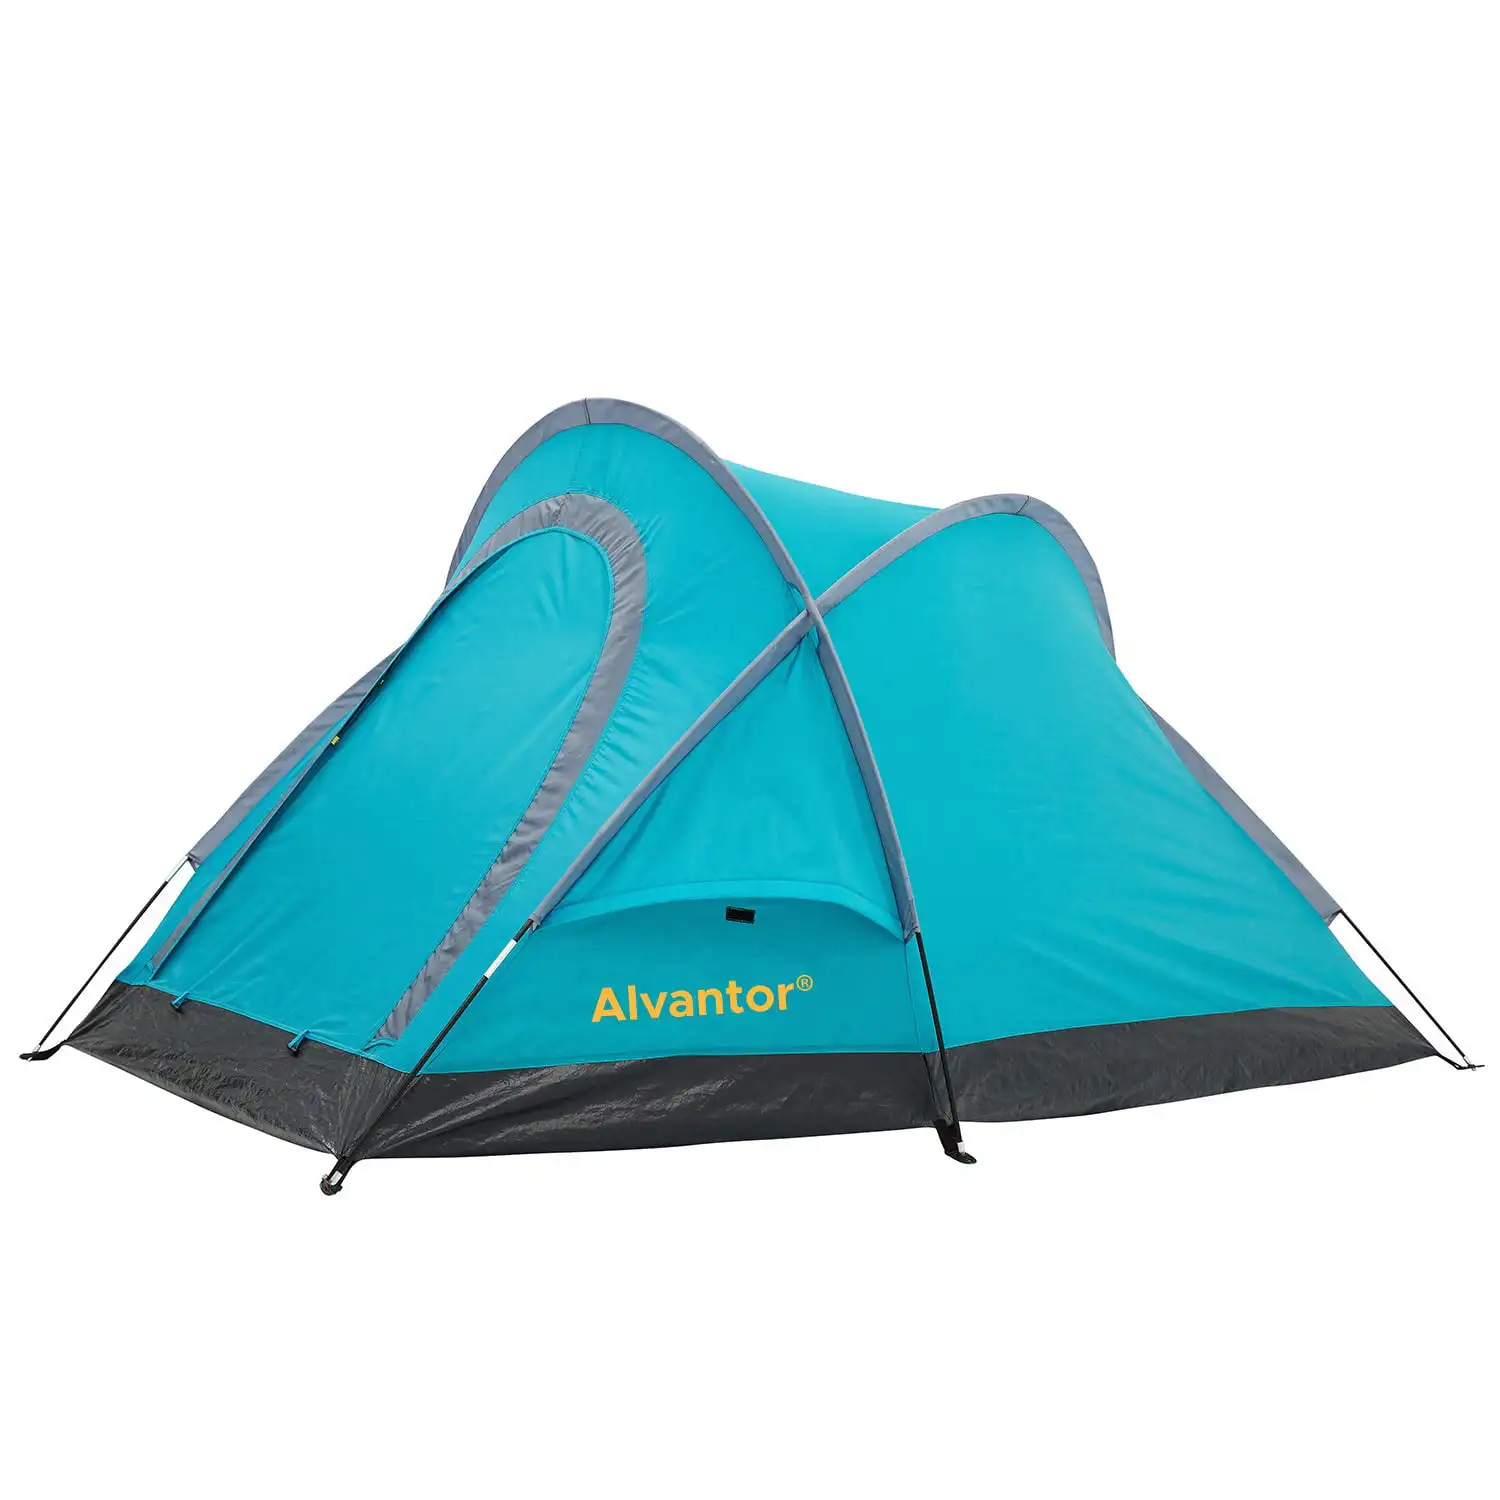 

Camping Tent Backpacking Outdoor Family Light Weight Waterproof 2-3 Person Tent Pop Up Shelter by Alvantor